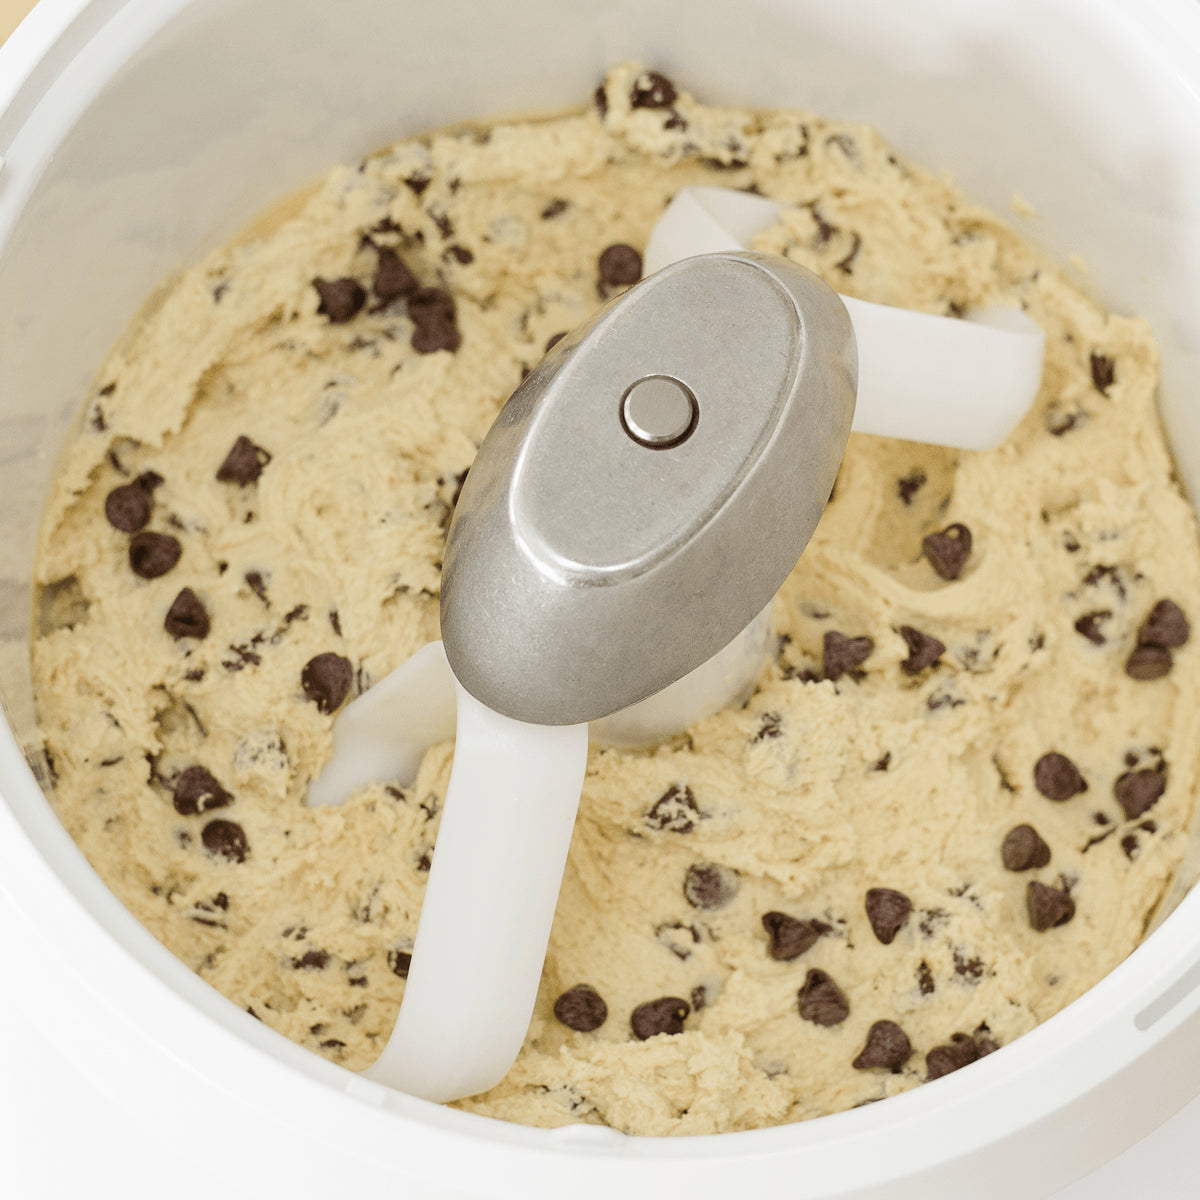 NEW! Bosch Universal Plus Cake Paddles!! Handy for anything with batter, -  muffins, pancakes or other tasty treats.